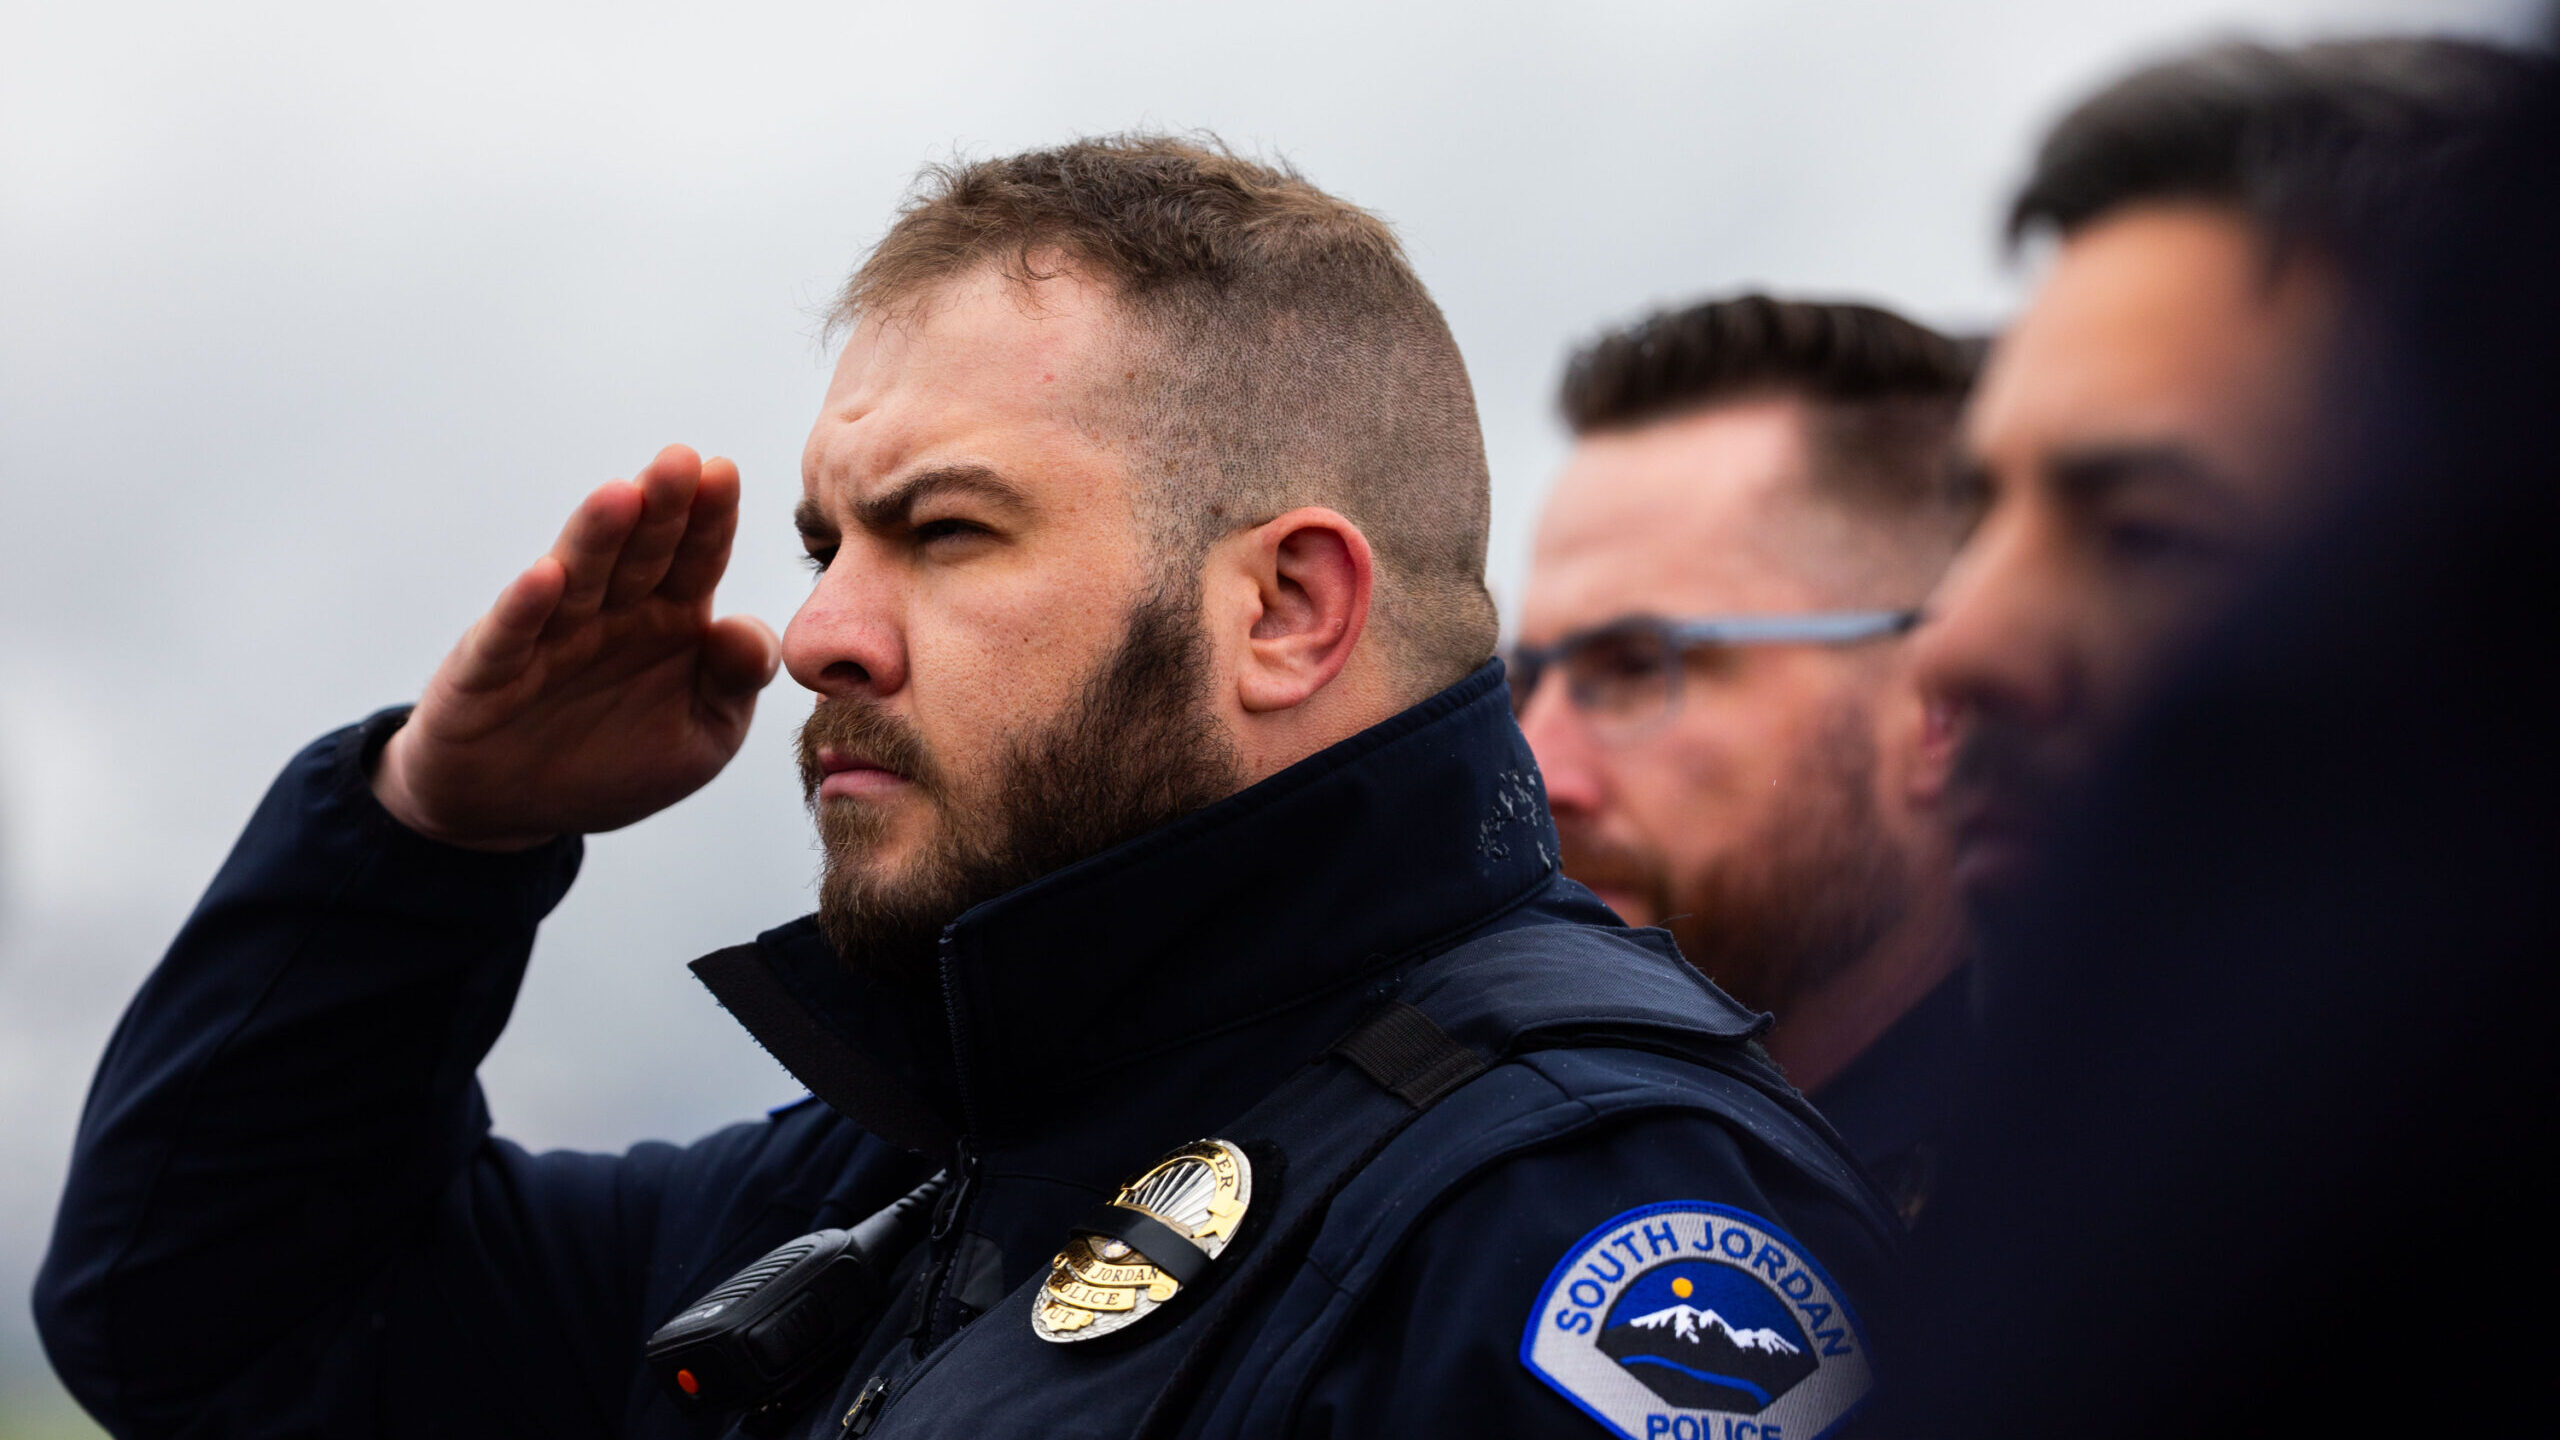 Officer Jeffrey Cox of the South Jordan Police Department salutes as a procession with the body of ...